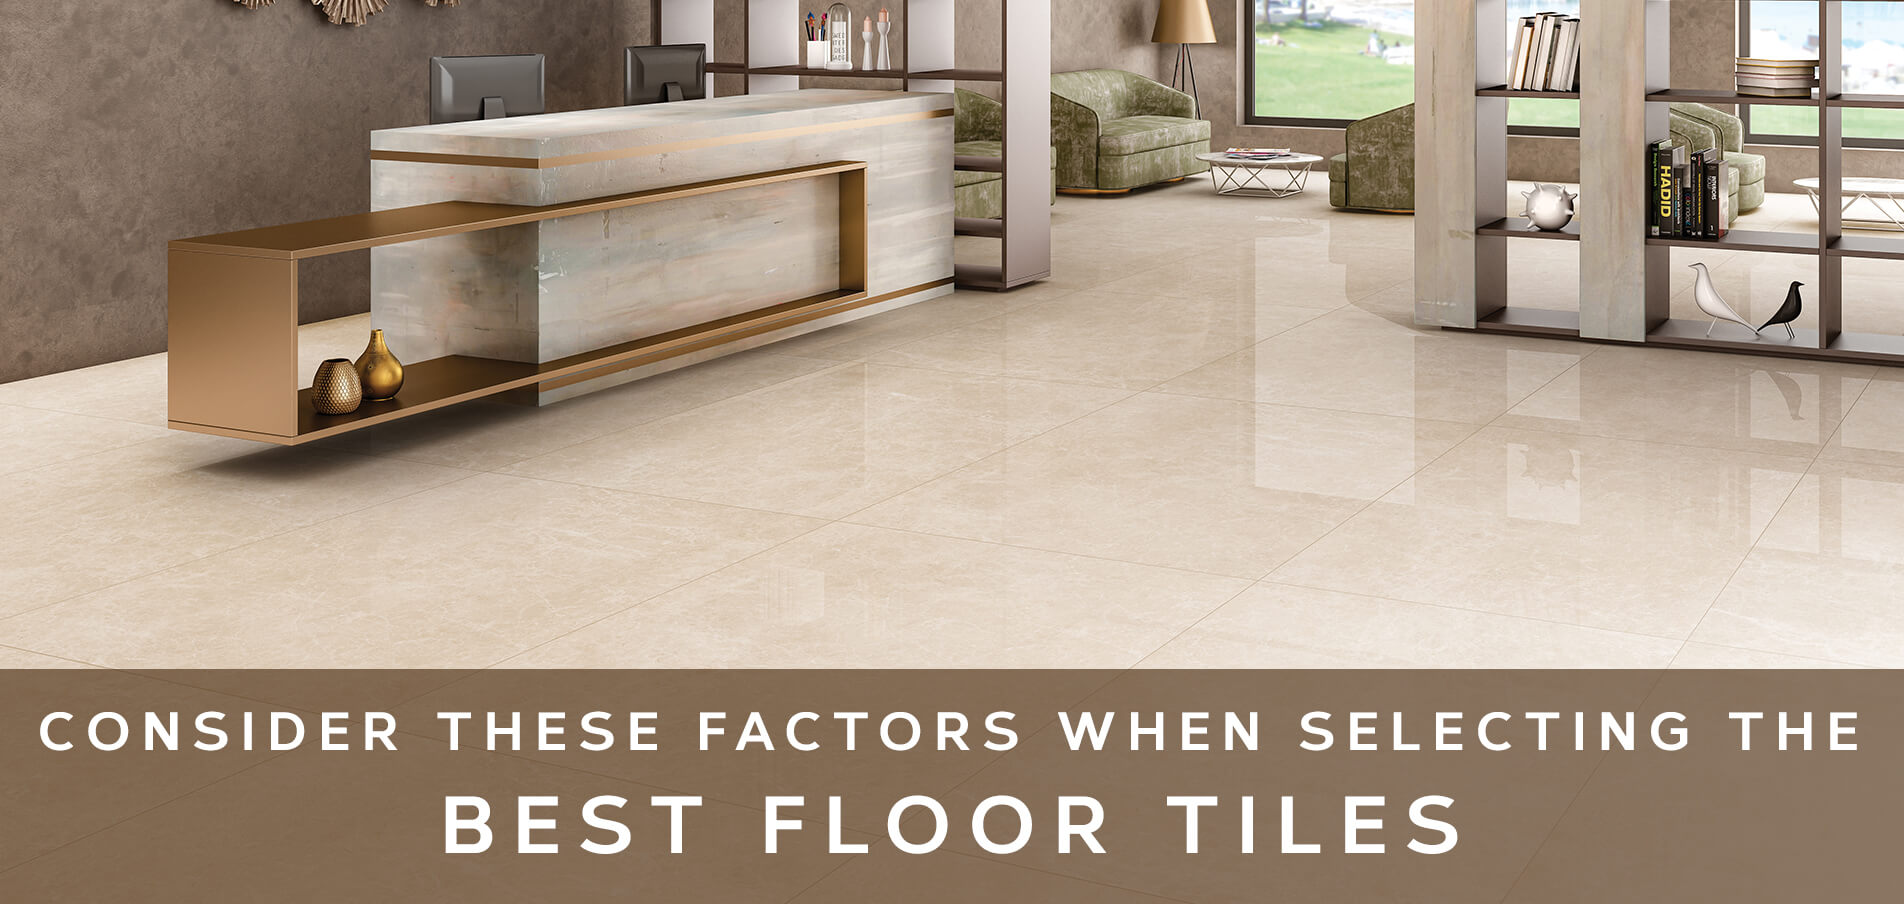 Consider These Factors When Selecting The Best Floor Tiles